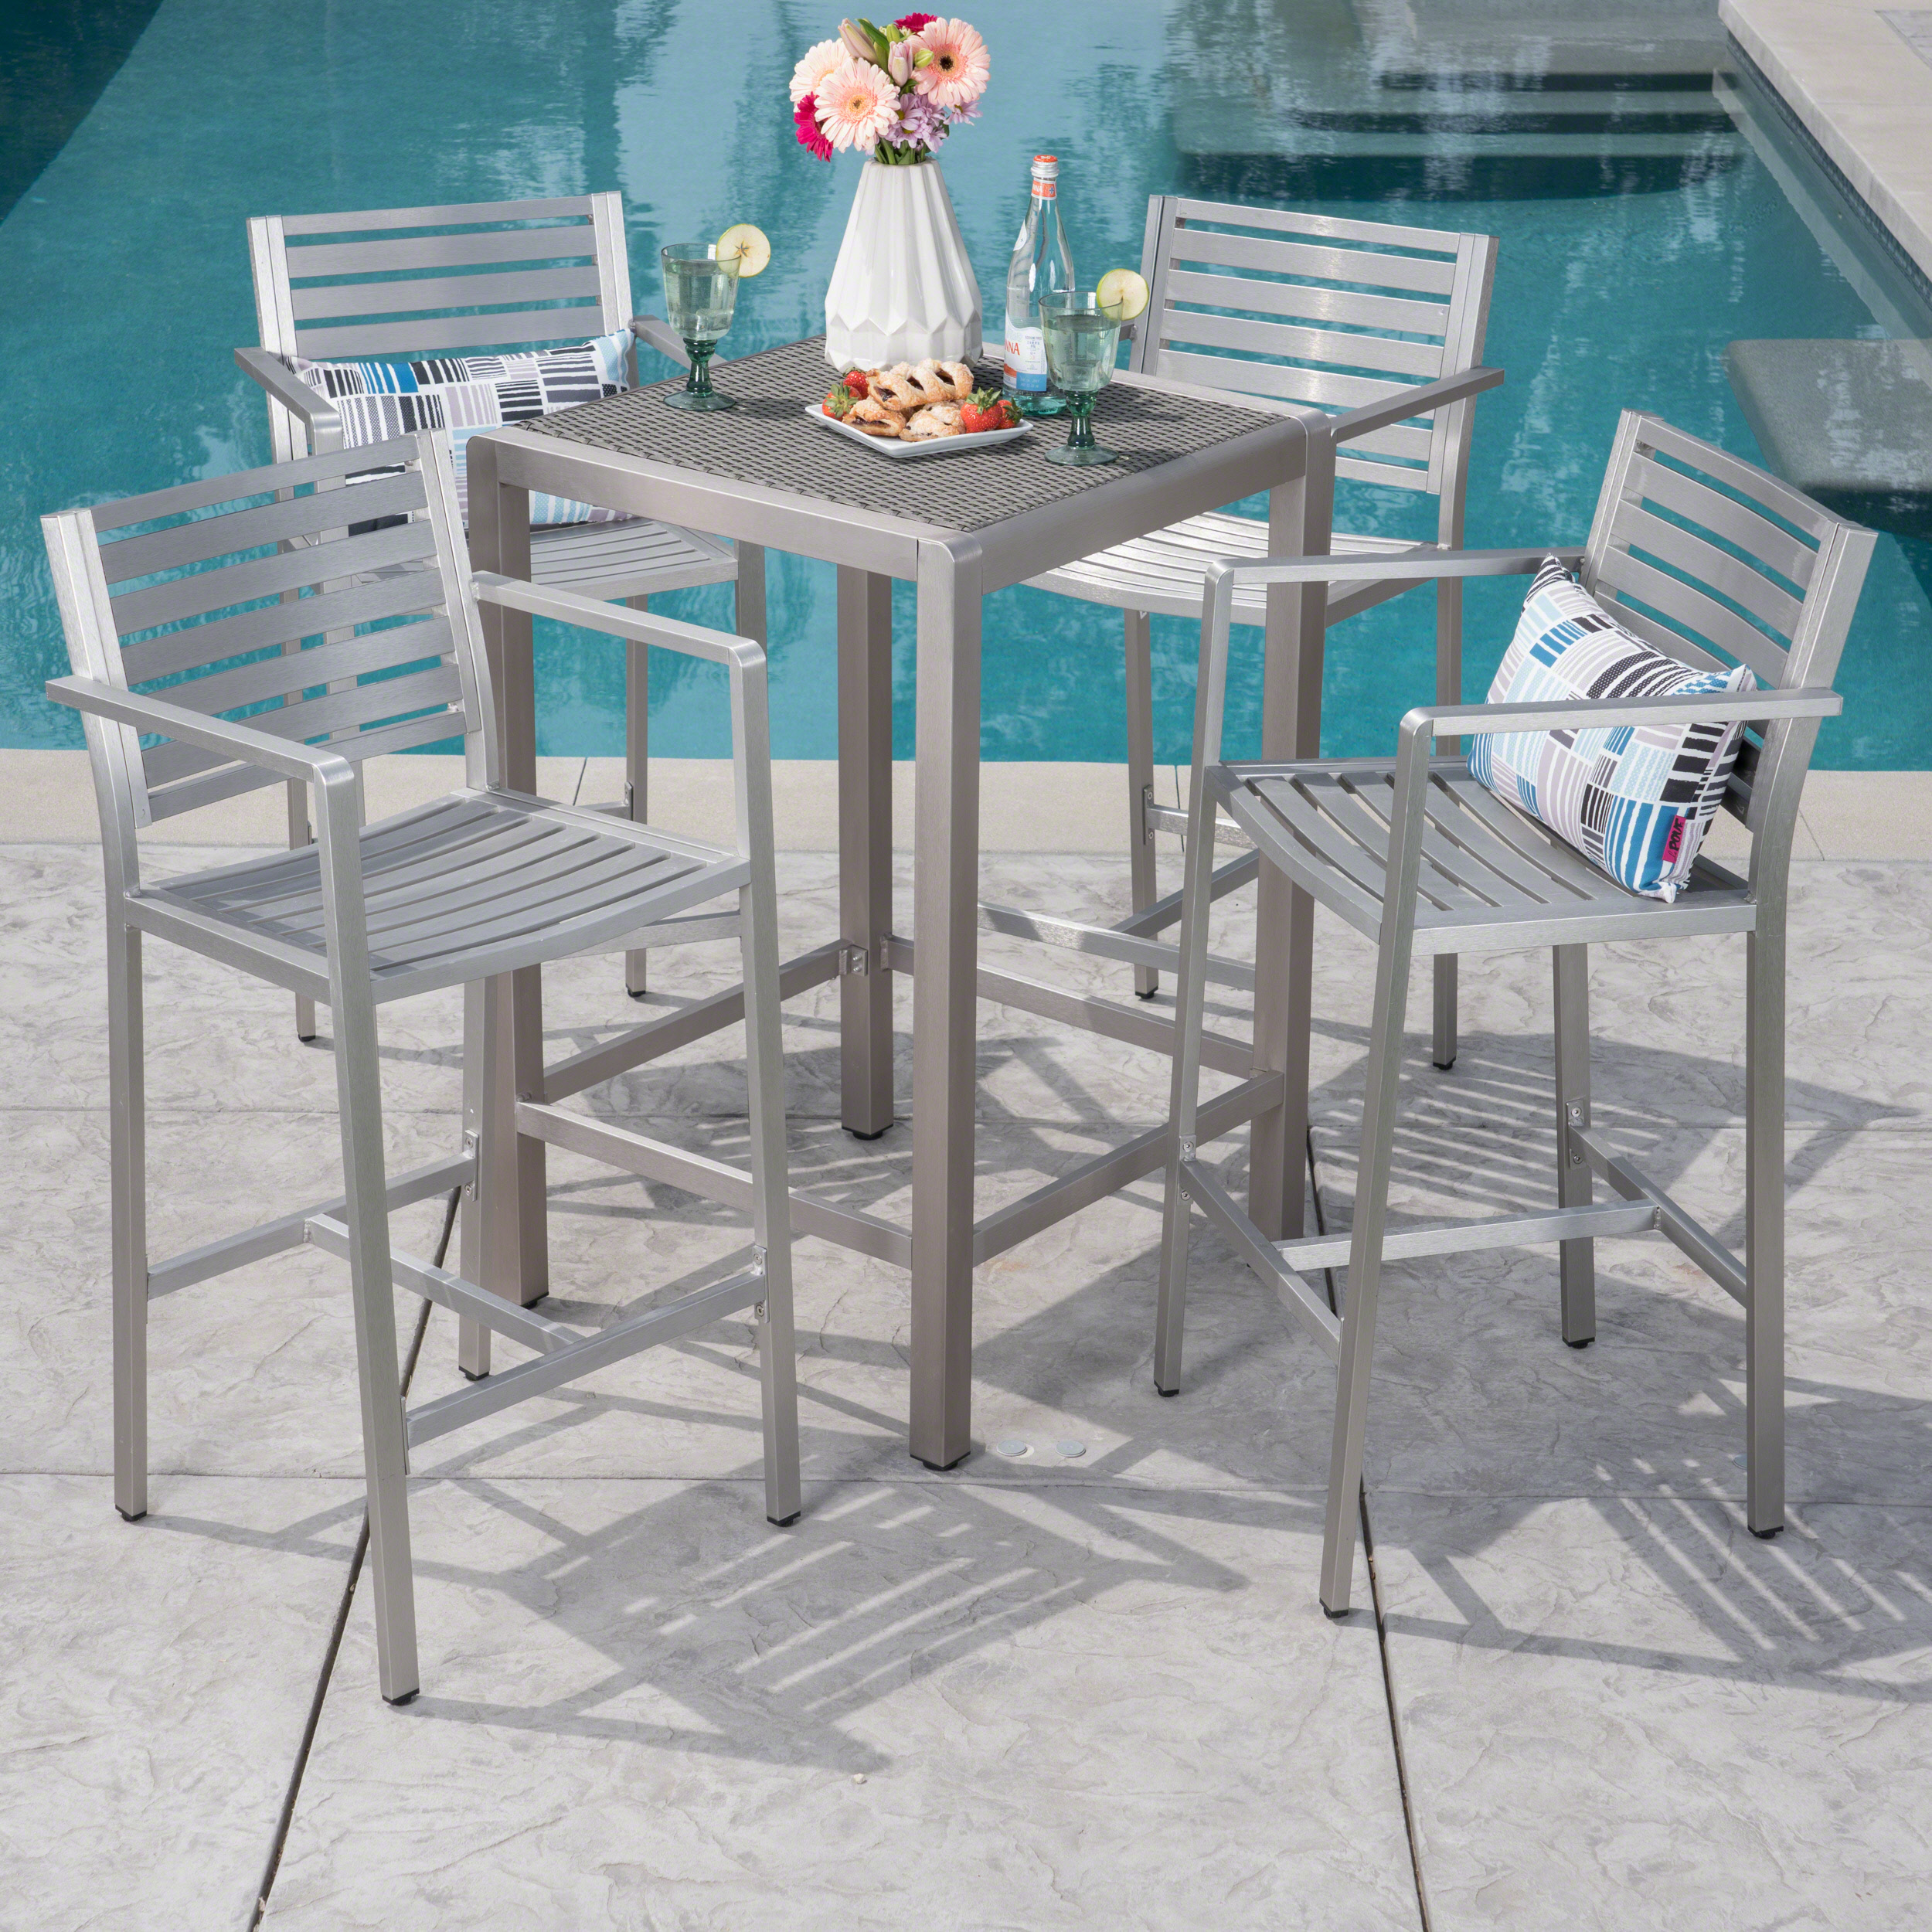 Gannon Outdoor 5 Piece Rust Proof Aluminum Bar Set With Wicker Top Bar Table, Grey, Silver - image 1 of 7